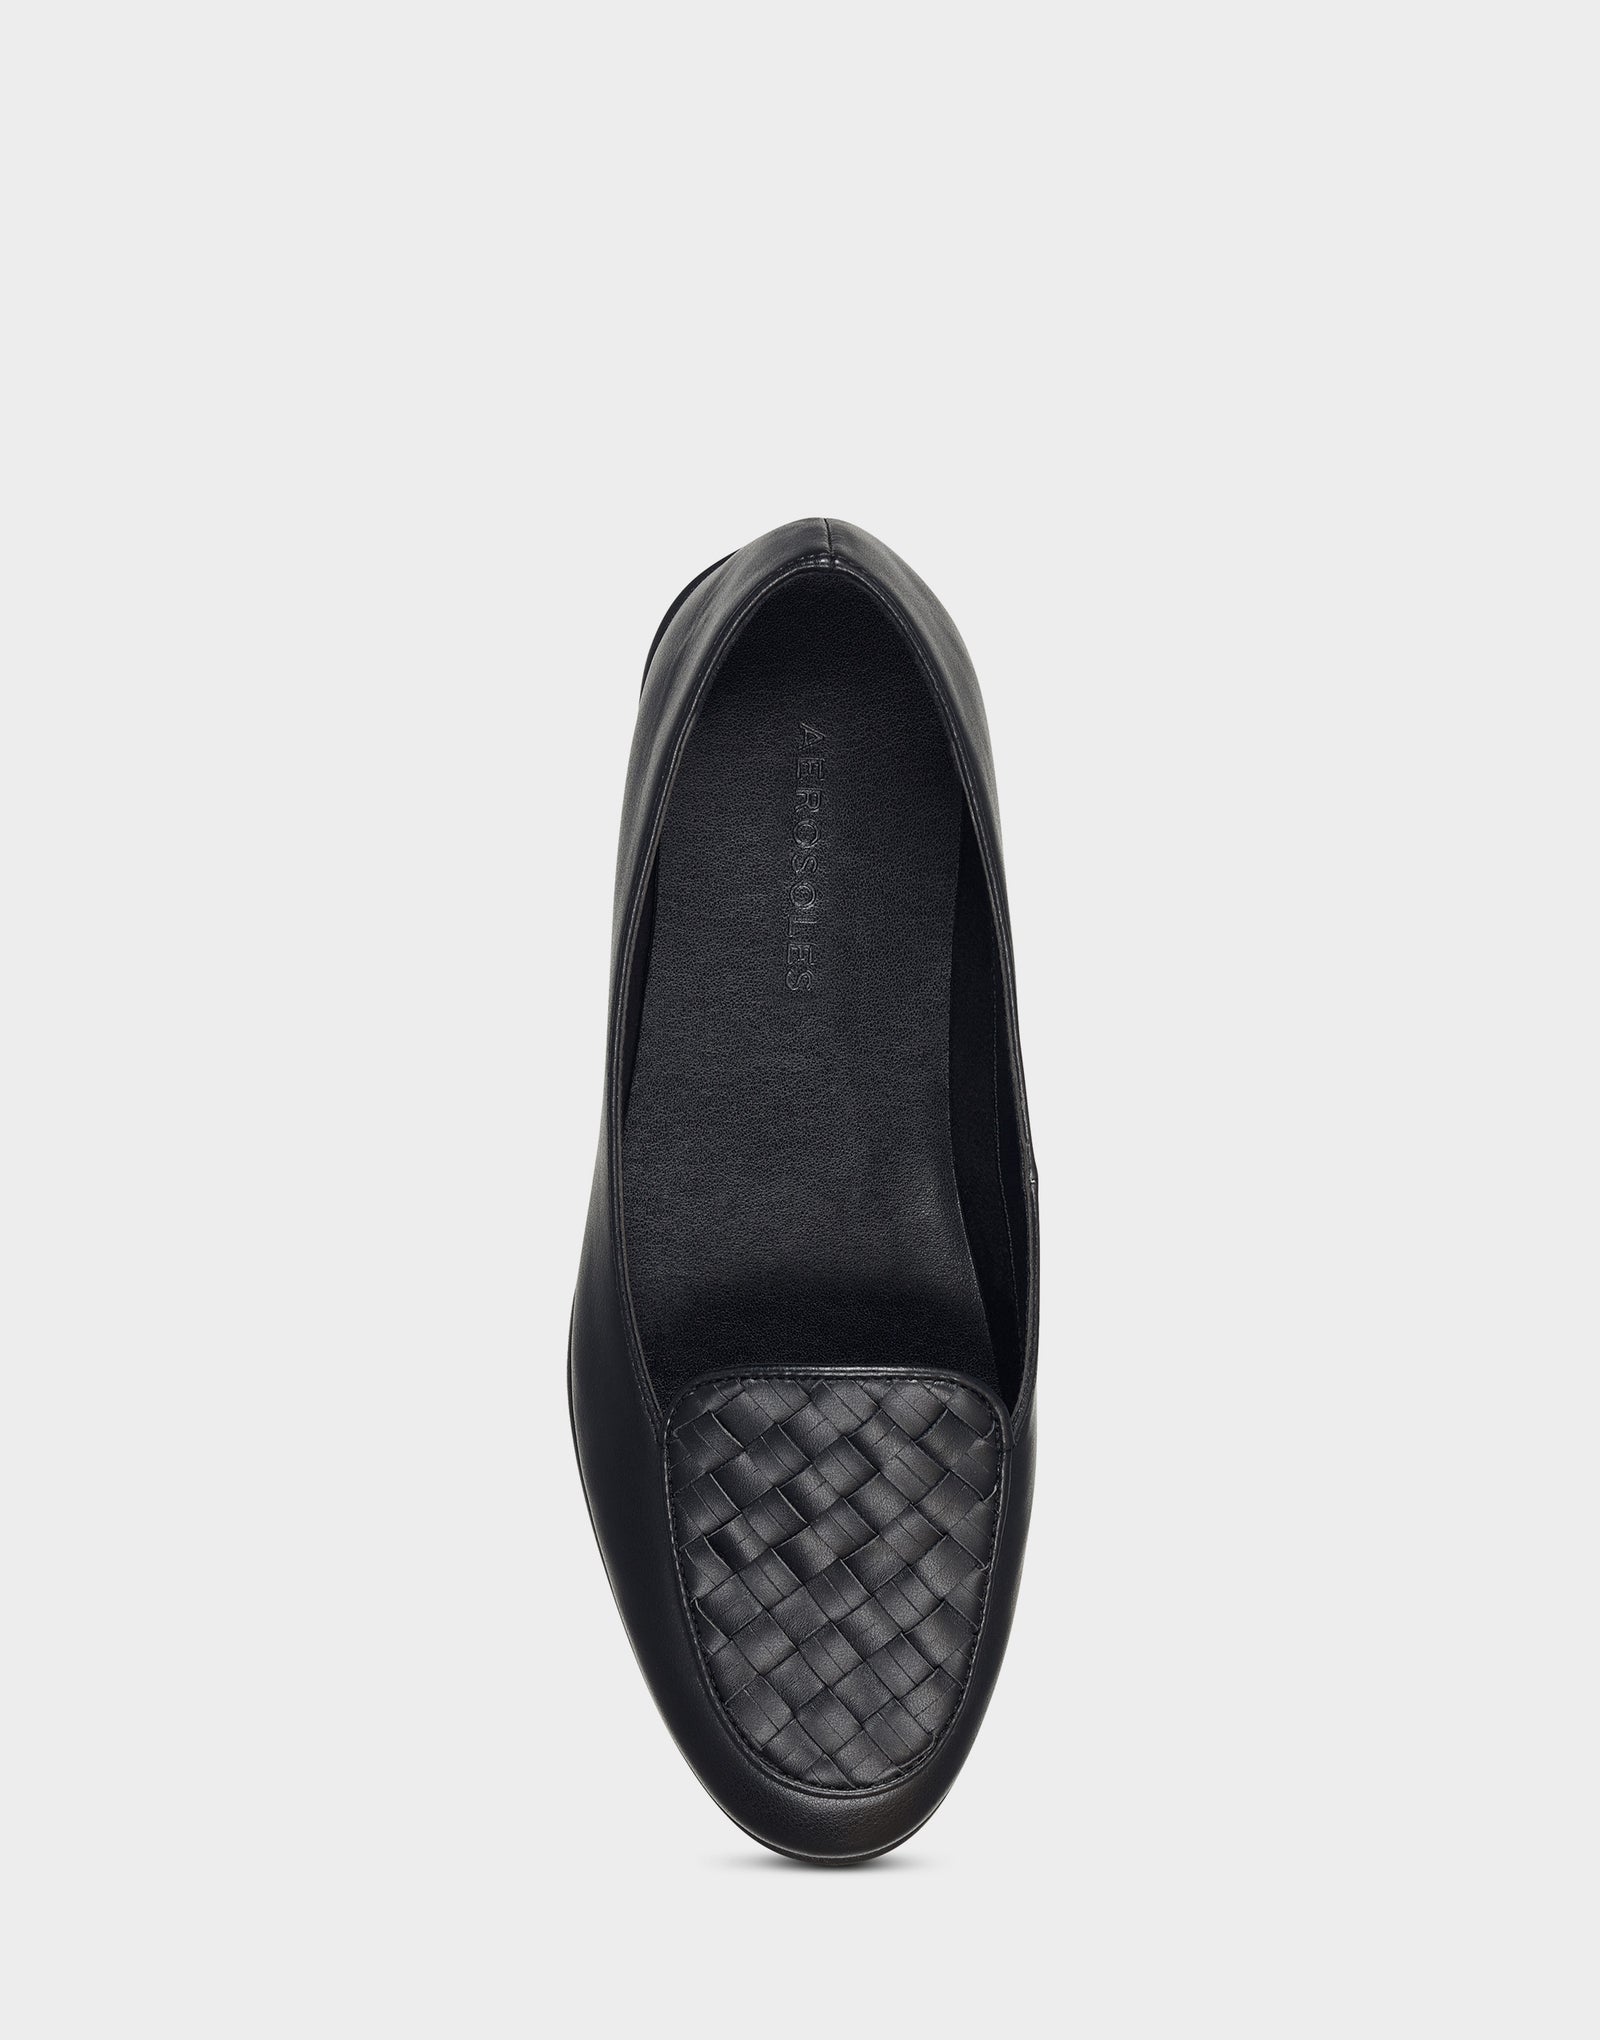 Women's Woven Plug Loafer in Black Faux Leather